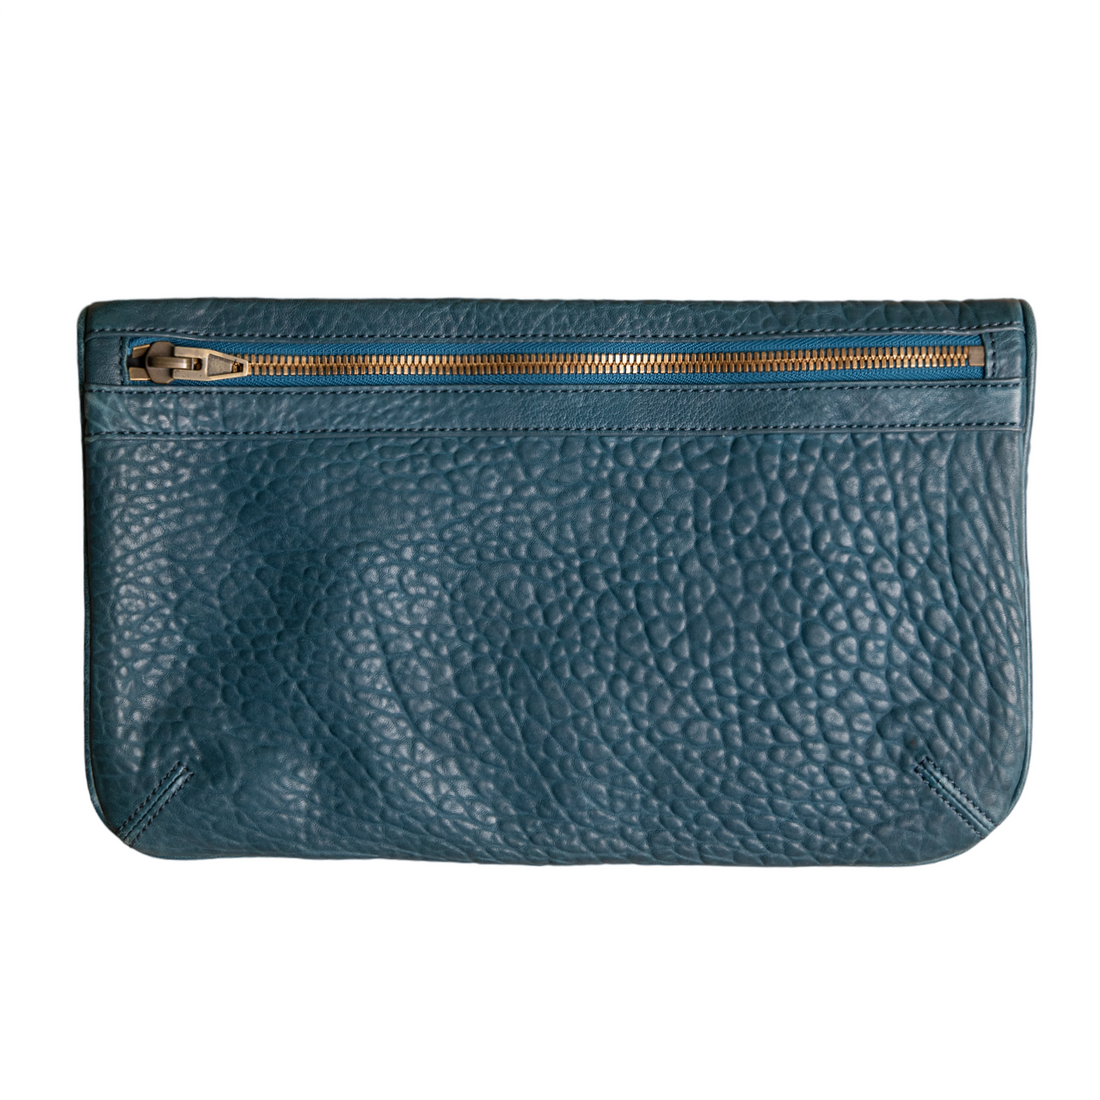 Alexander Wang Large clutch made of rustic leather